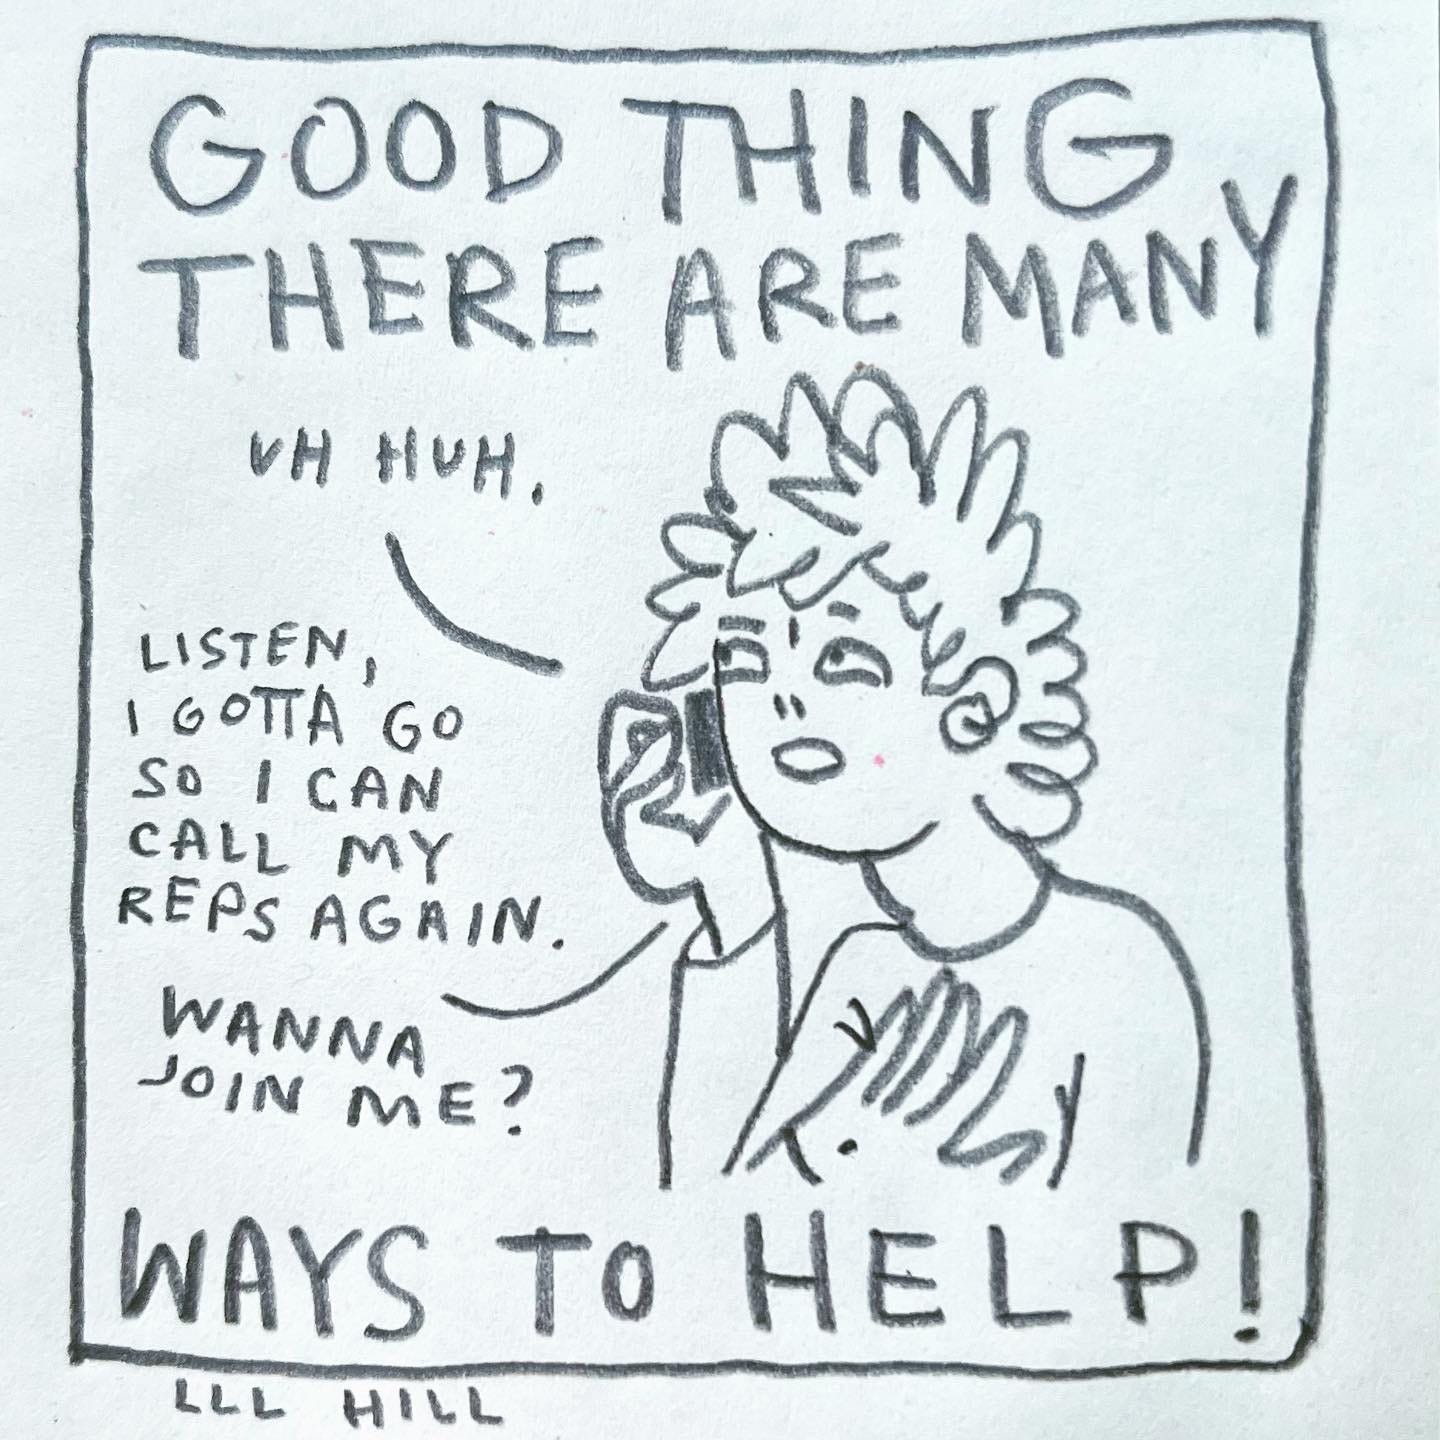 Panel 6: good thing there are many ways to help! Image: Lark is on the phone again, looking skeptical and inquisitive, one hand on their chest. They say into the phone “Uh huh. Listen, I gotta go so I can call my reps again. Wanna join me?"